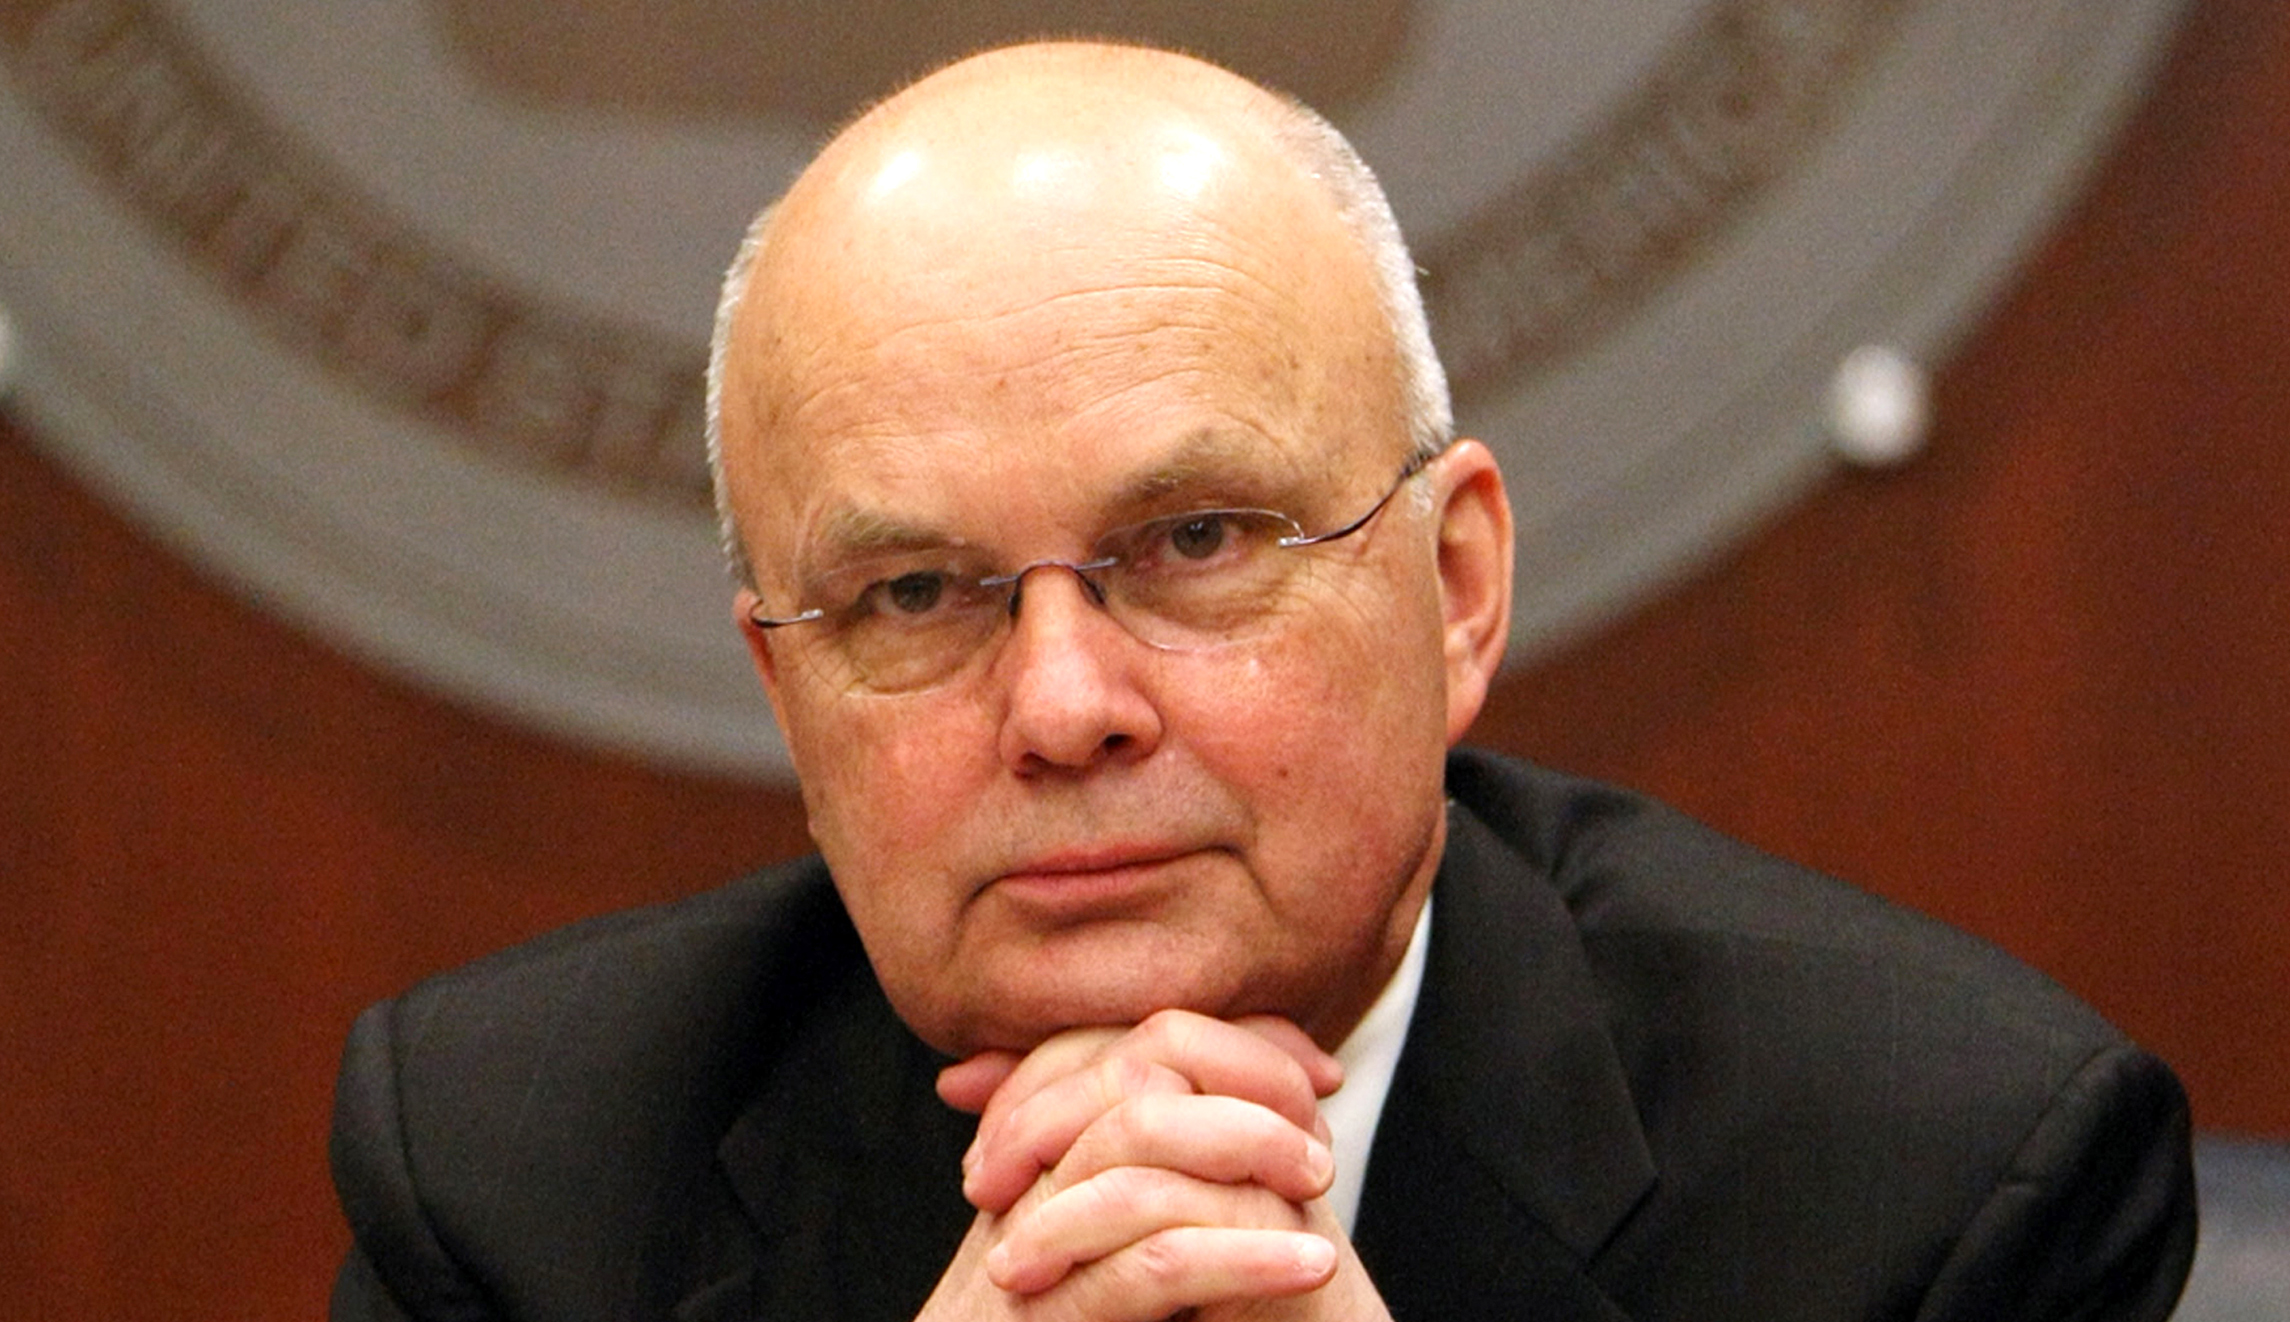 This 2009 file photo shows then-CIA Director Michael Hayden, and a former National Security Agency (NSA) chief, participates in a news conference at CIA headquarters in Langley, Va.